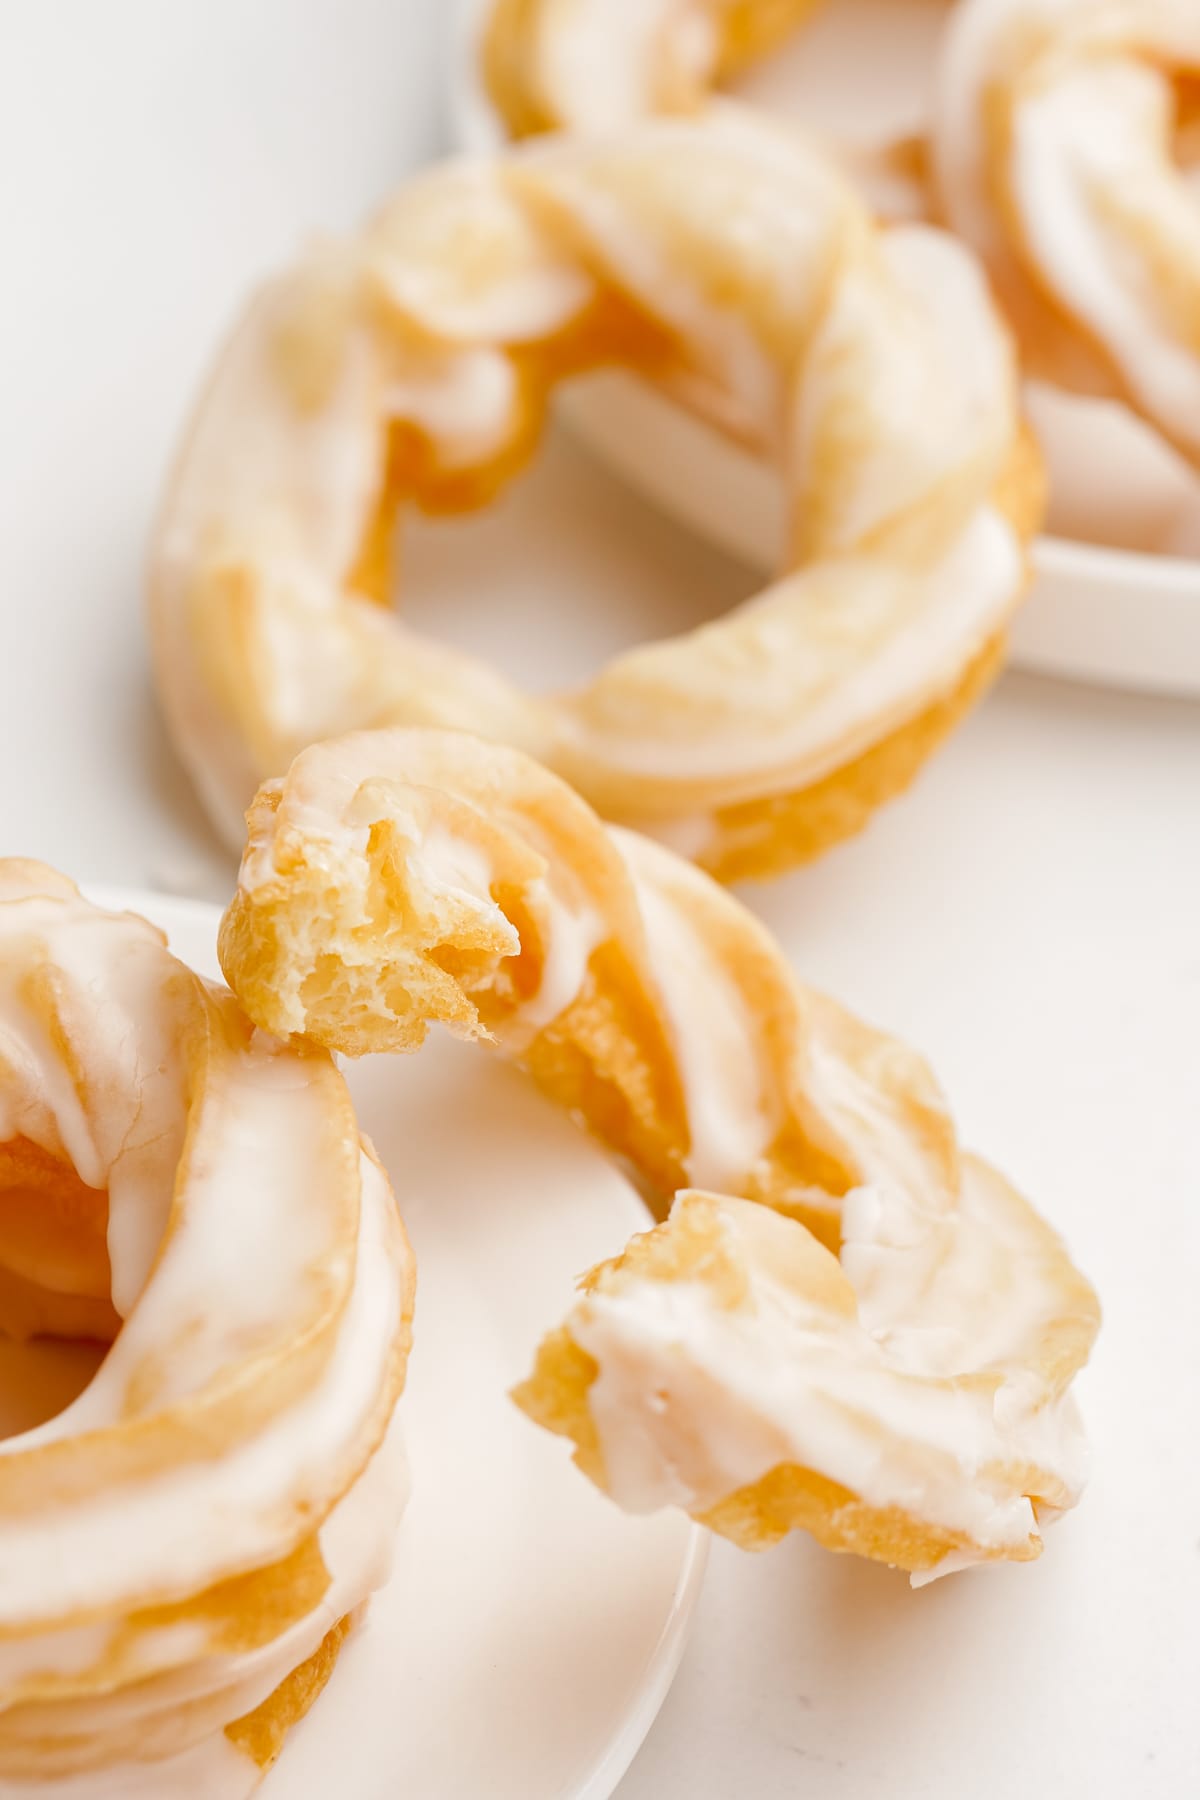 french crullers with bite taken out of one